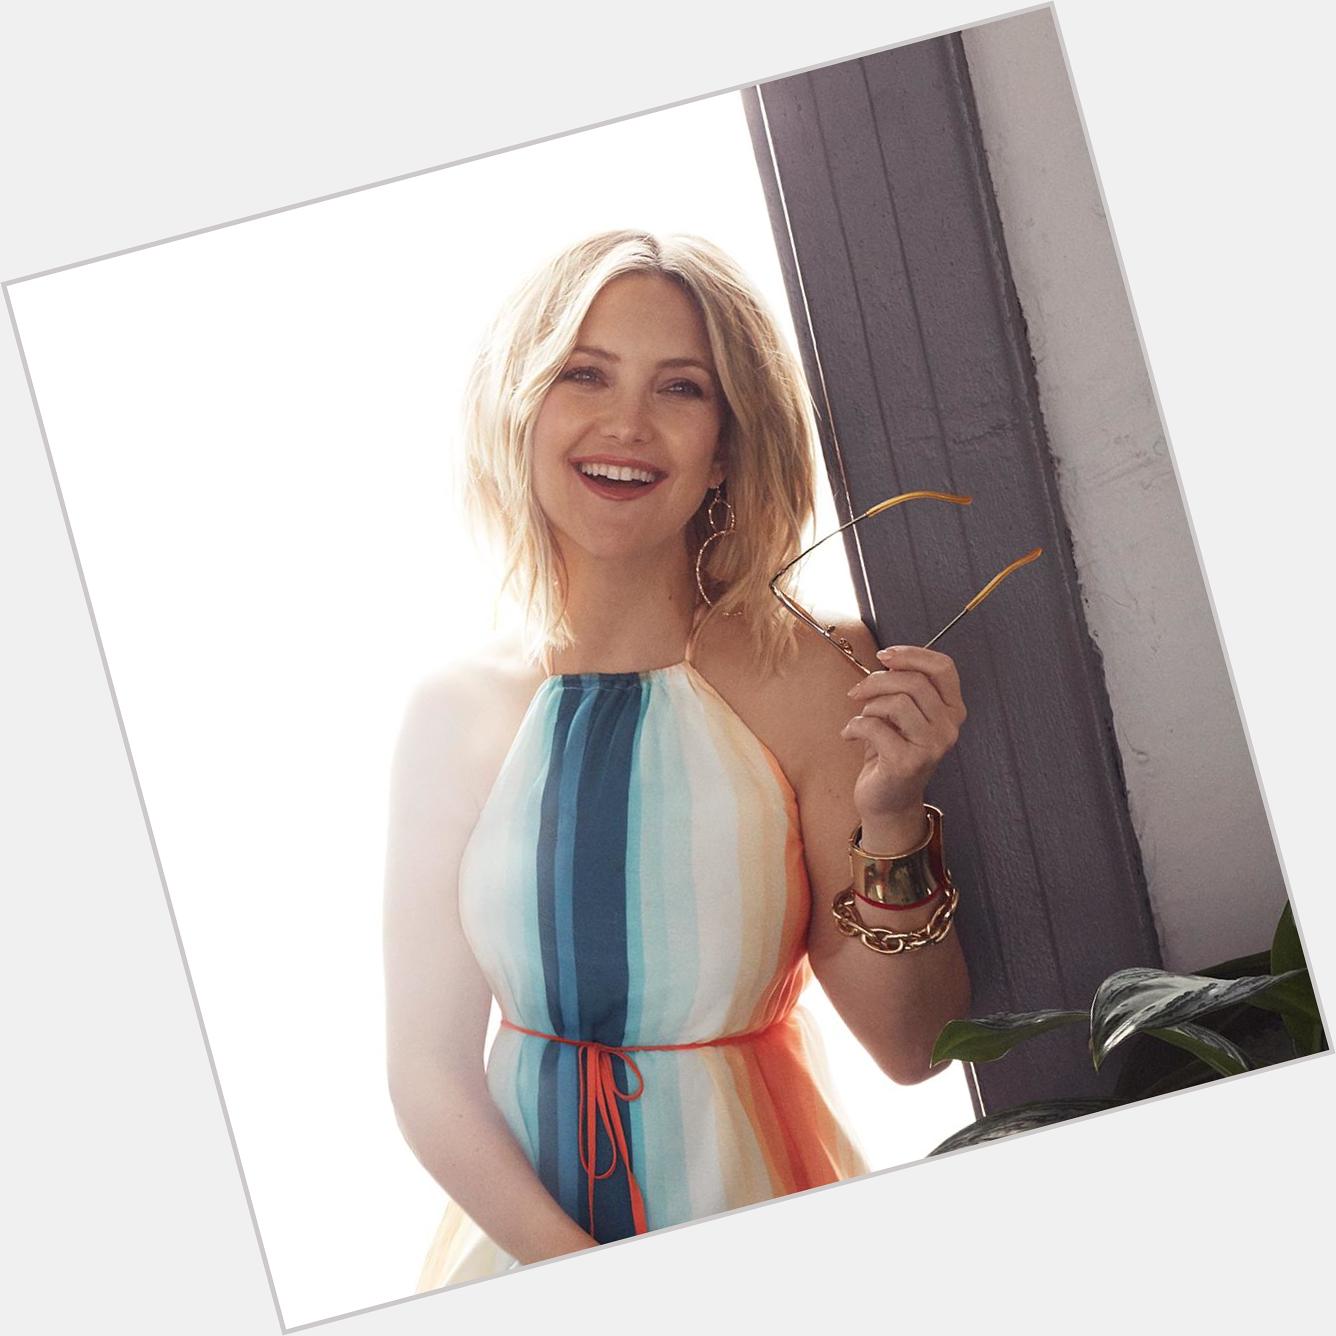 Happy Birthday, Kate Hudson! We wish you a day filled with love and happiness! 